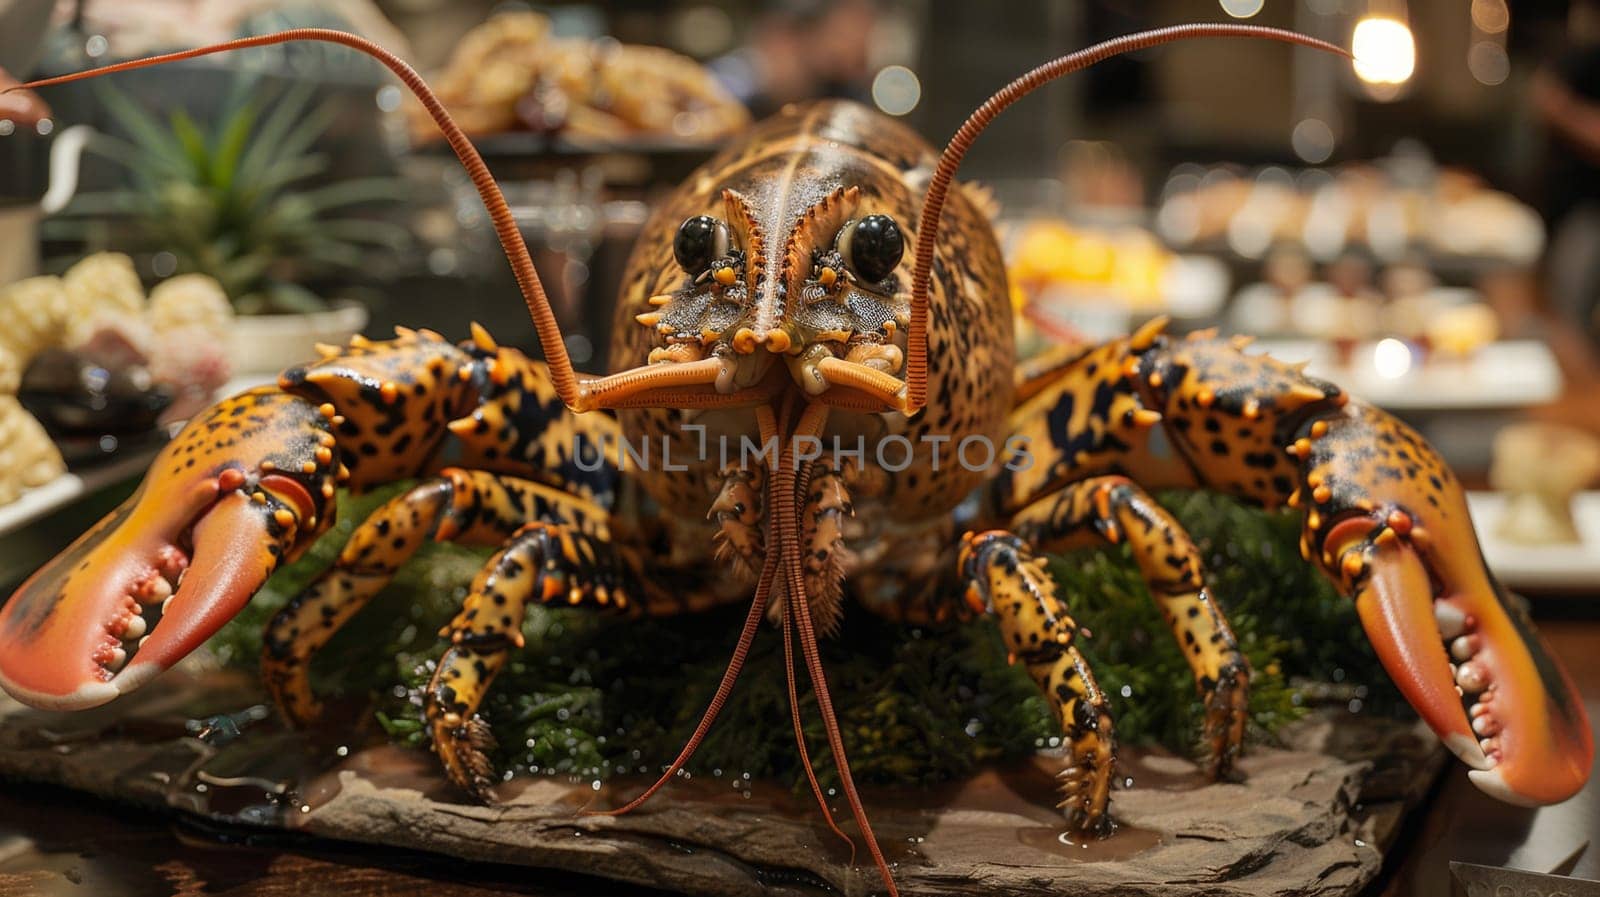 A large lobster sitting on top of a table with other food